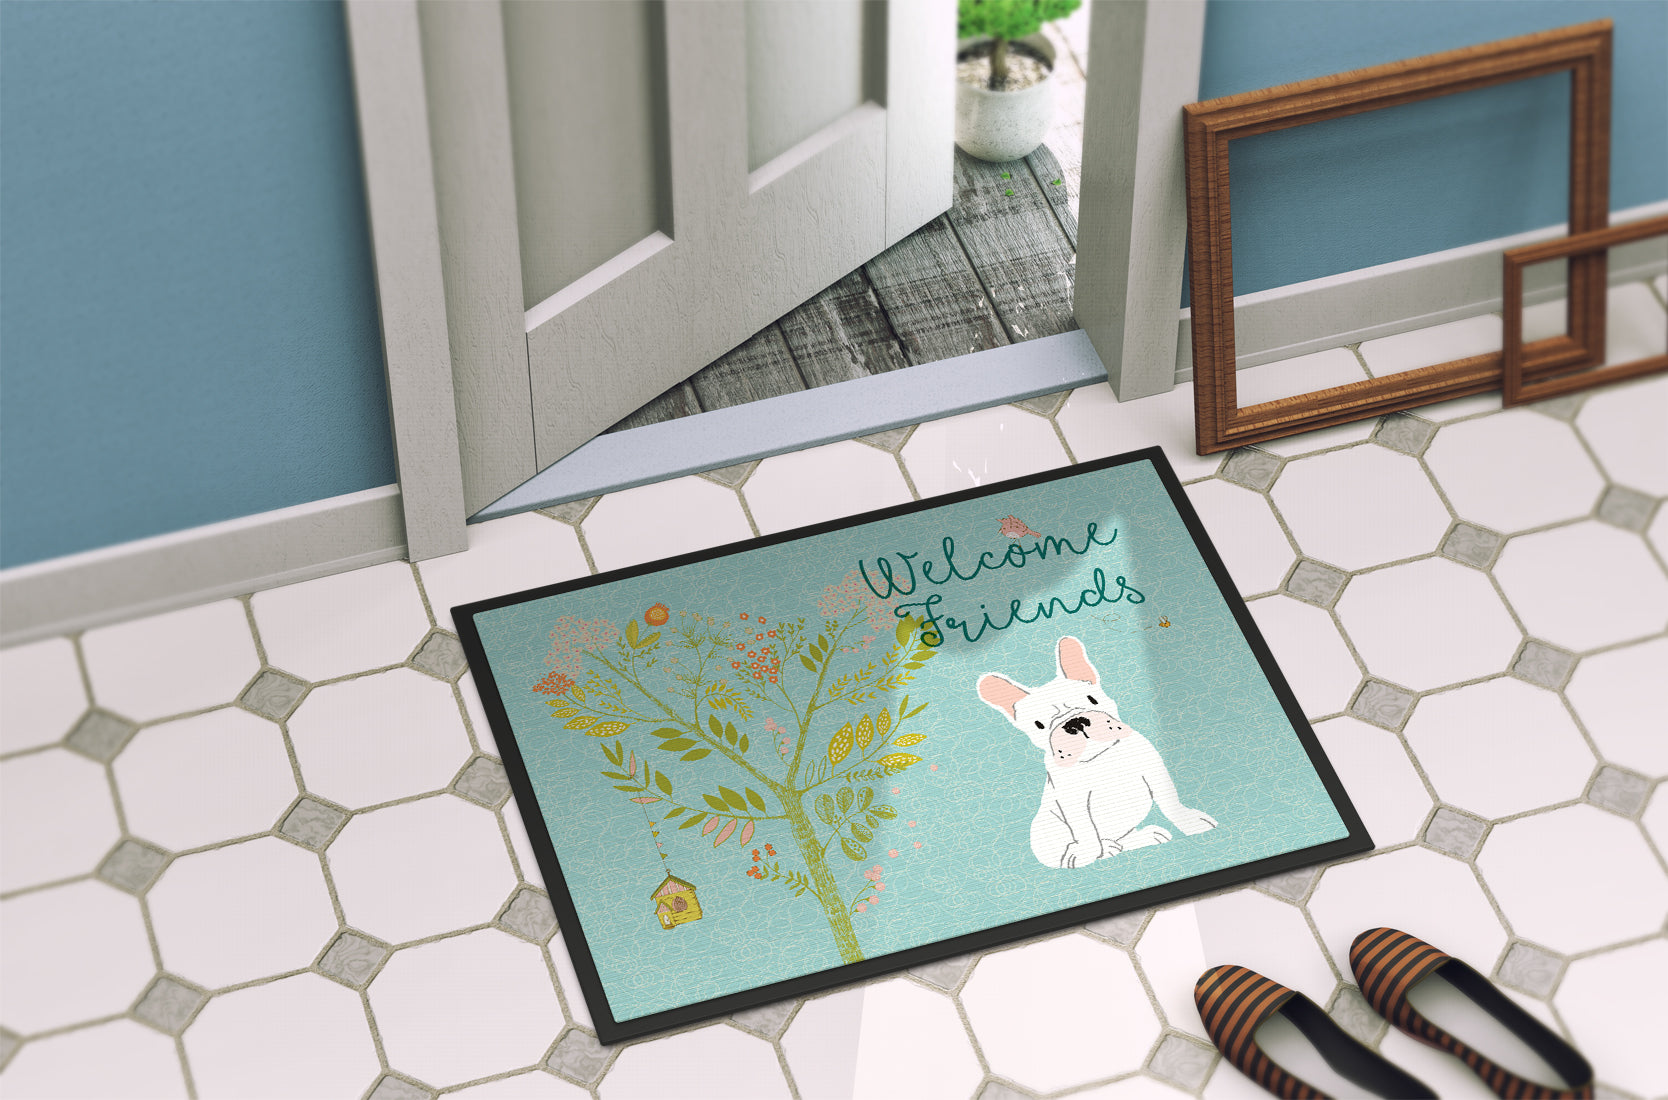 Welcome Friends White French Bulldog Indoor or Outdoor Mat 18x27 BB7635MAT - the-store.com